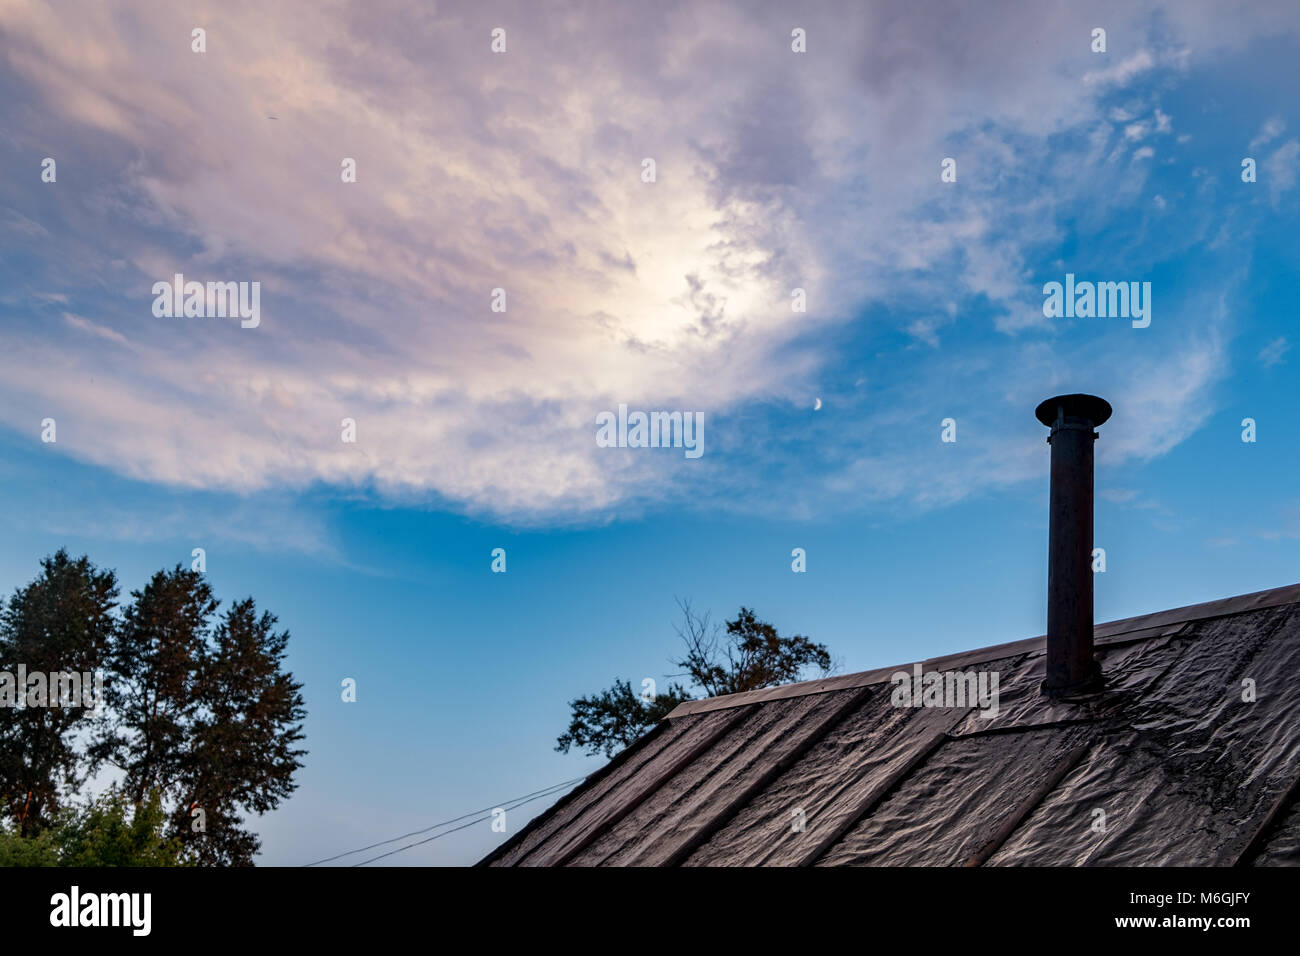 Early evening sky with mix of pink and blue hues. In foreground worn rooftop with roofing felt and metal chimney contrasts with natural backdrop Stock Photo